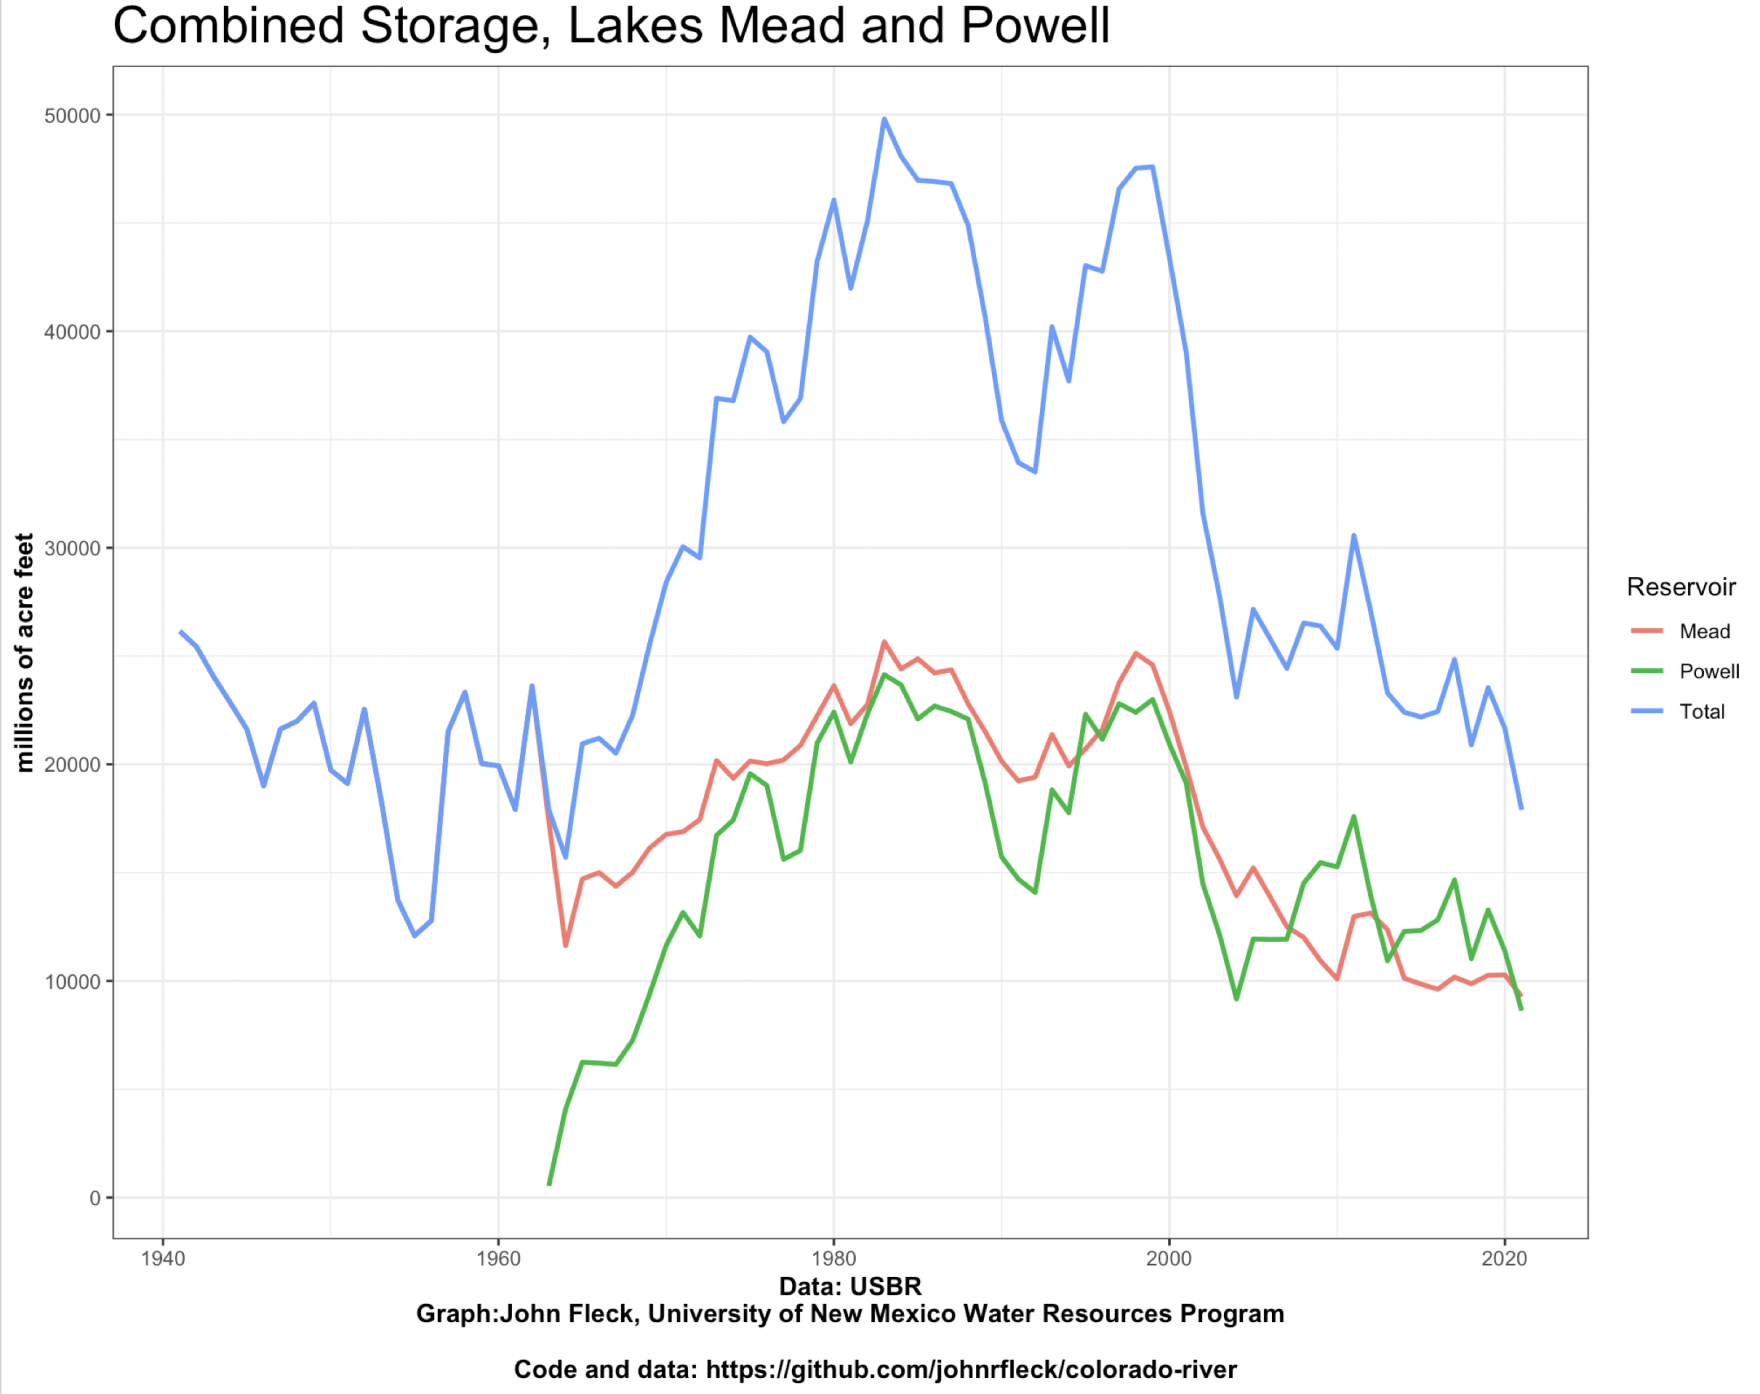 a graph with multiple lines that is titled "combined storage, lakes mead and powell" the lines show the storage was highest from 1980-2000 and has declined sharply since